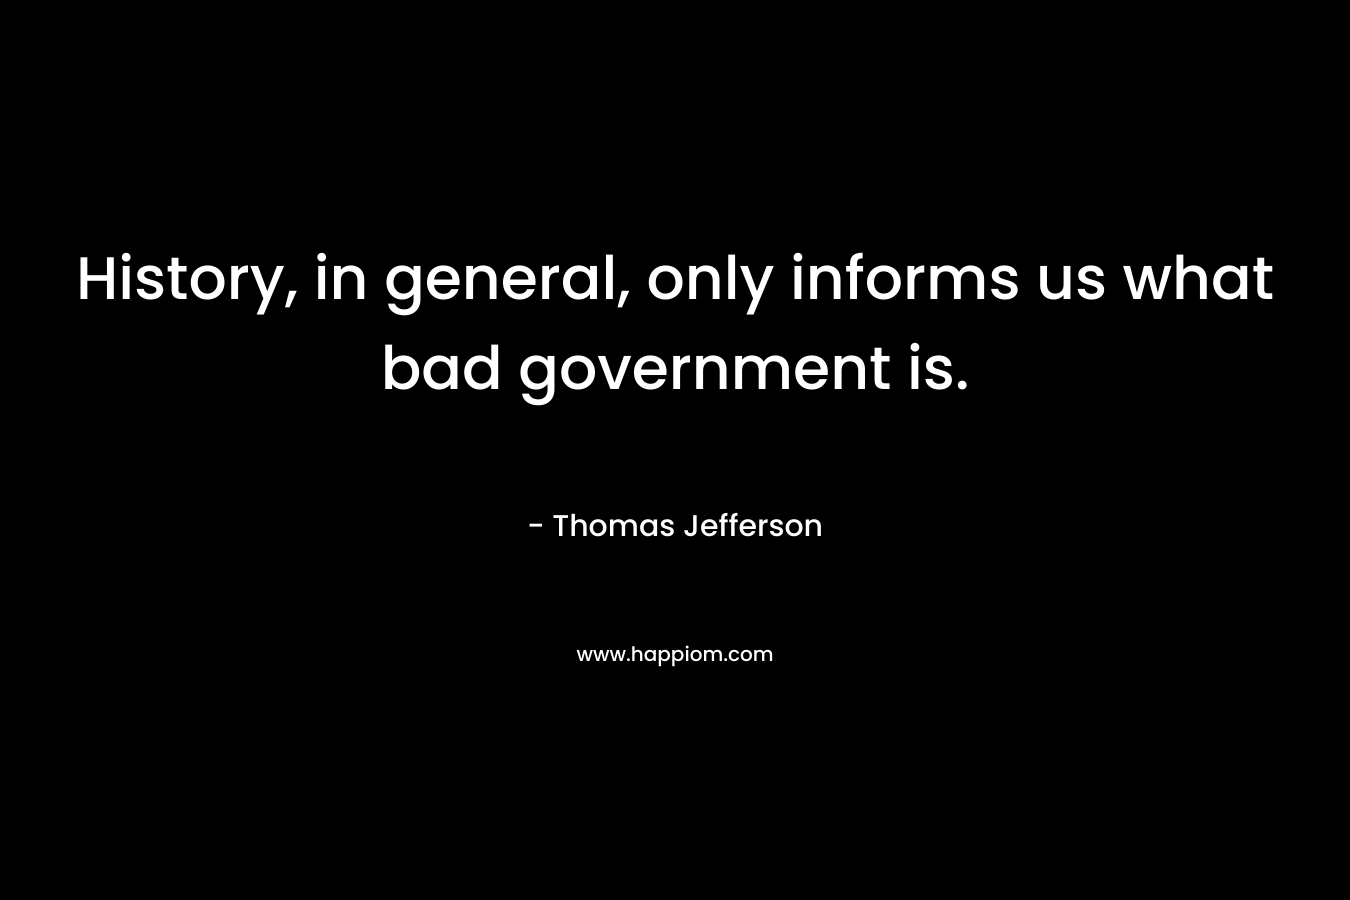 History, in general, only informs us what bad government is.